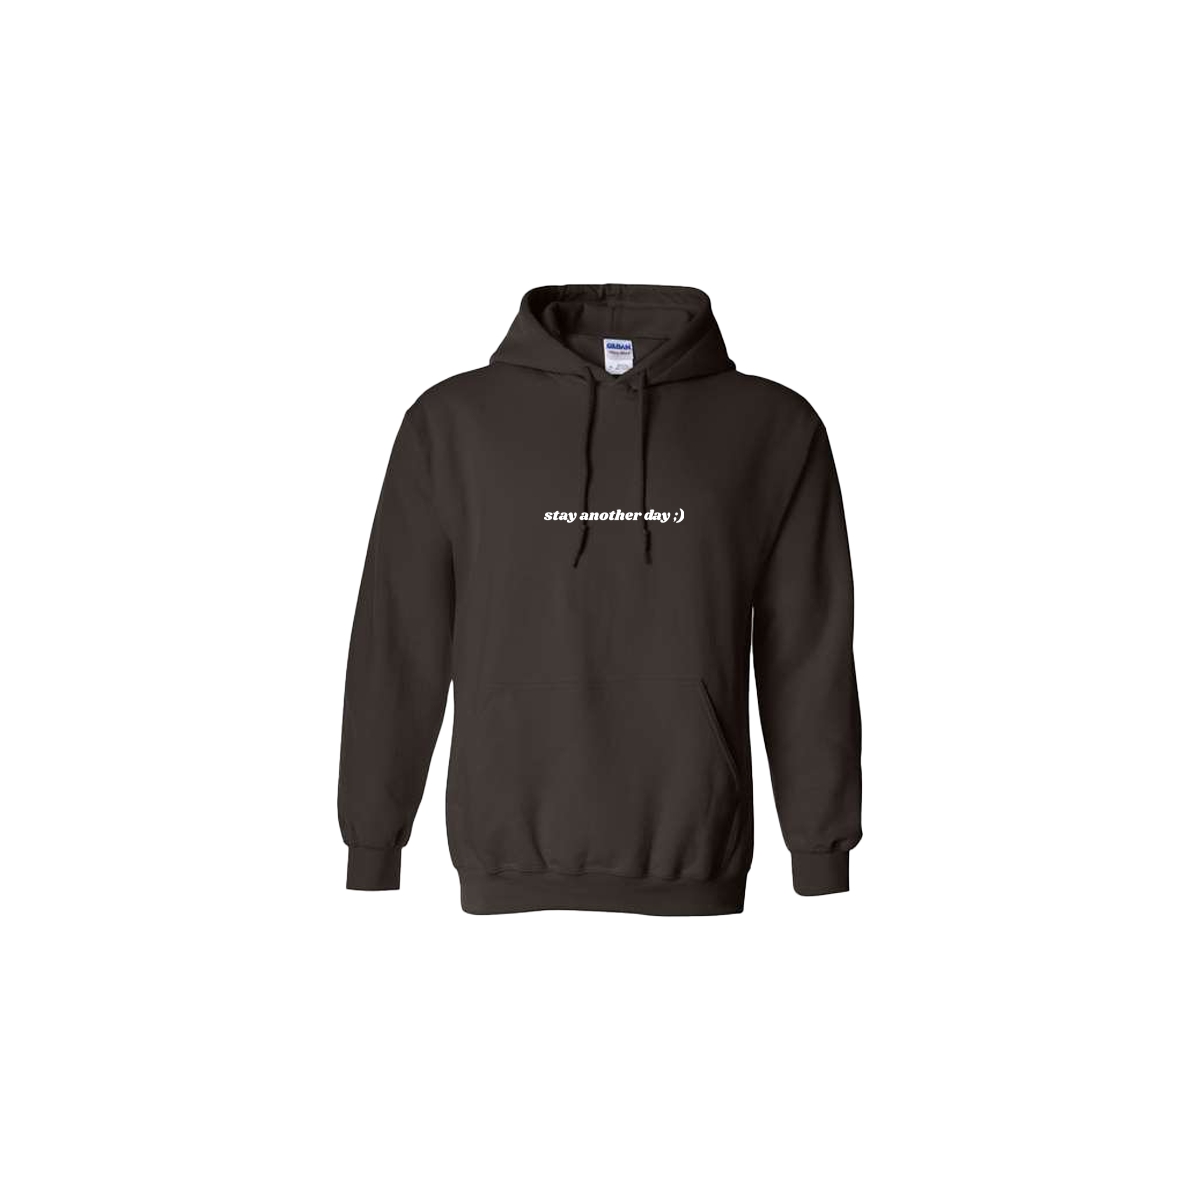 Stay Another Day Embroidered Brown Hoodie - Mental Health Awareness Clothing